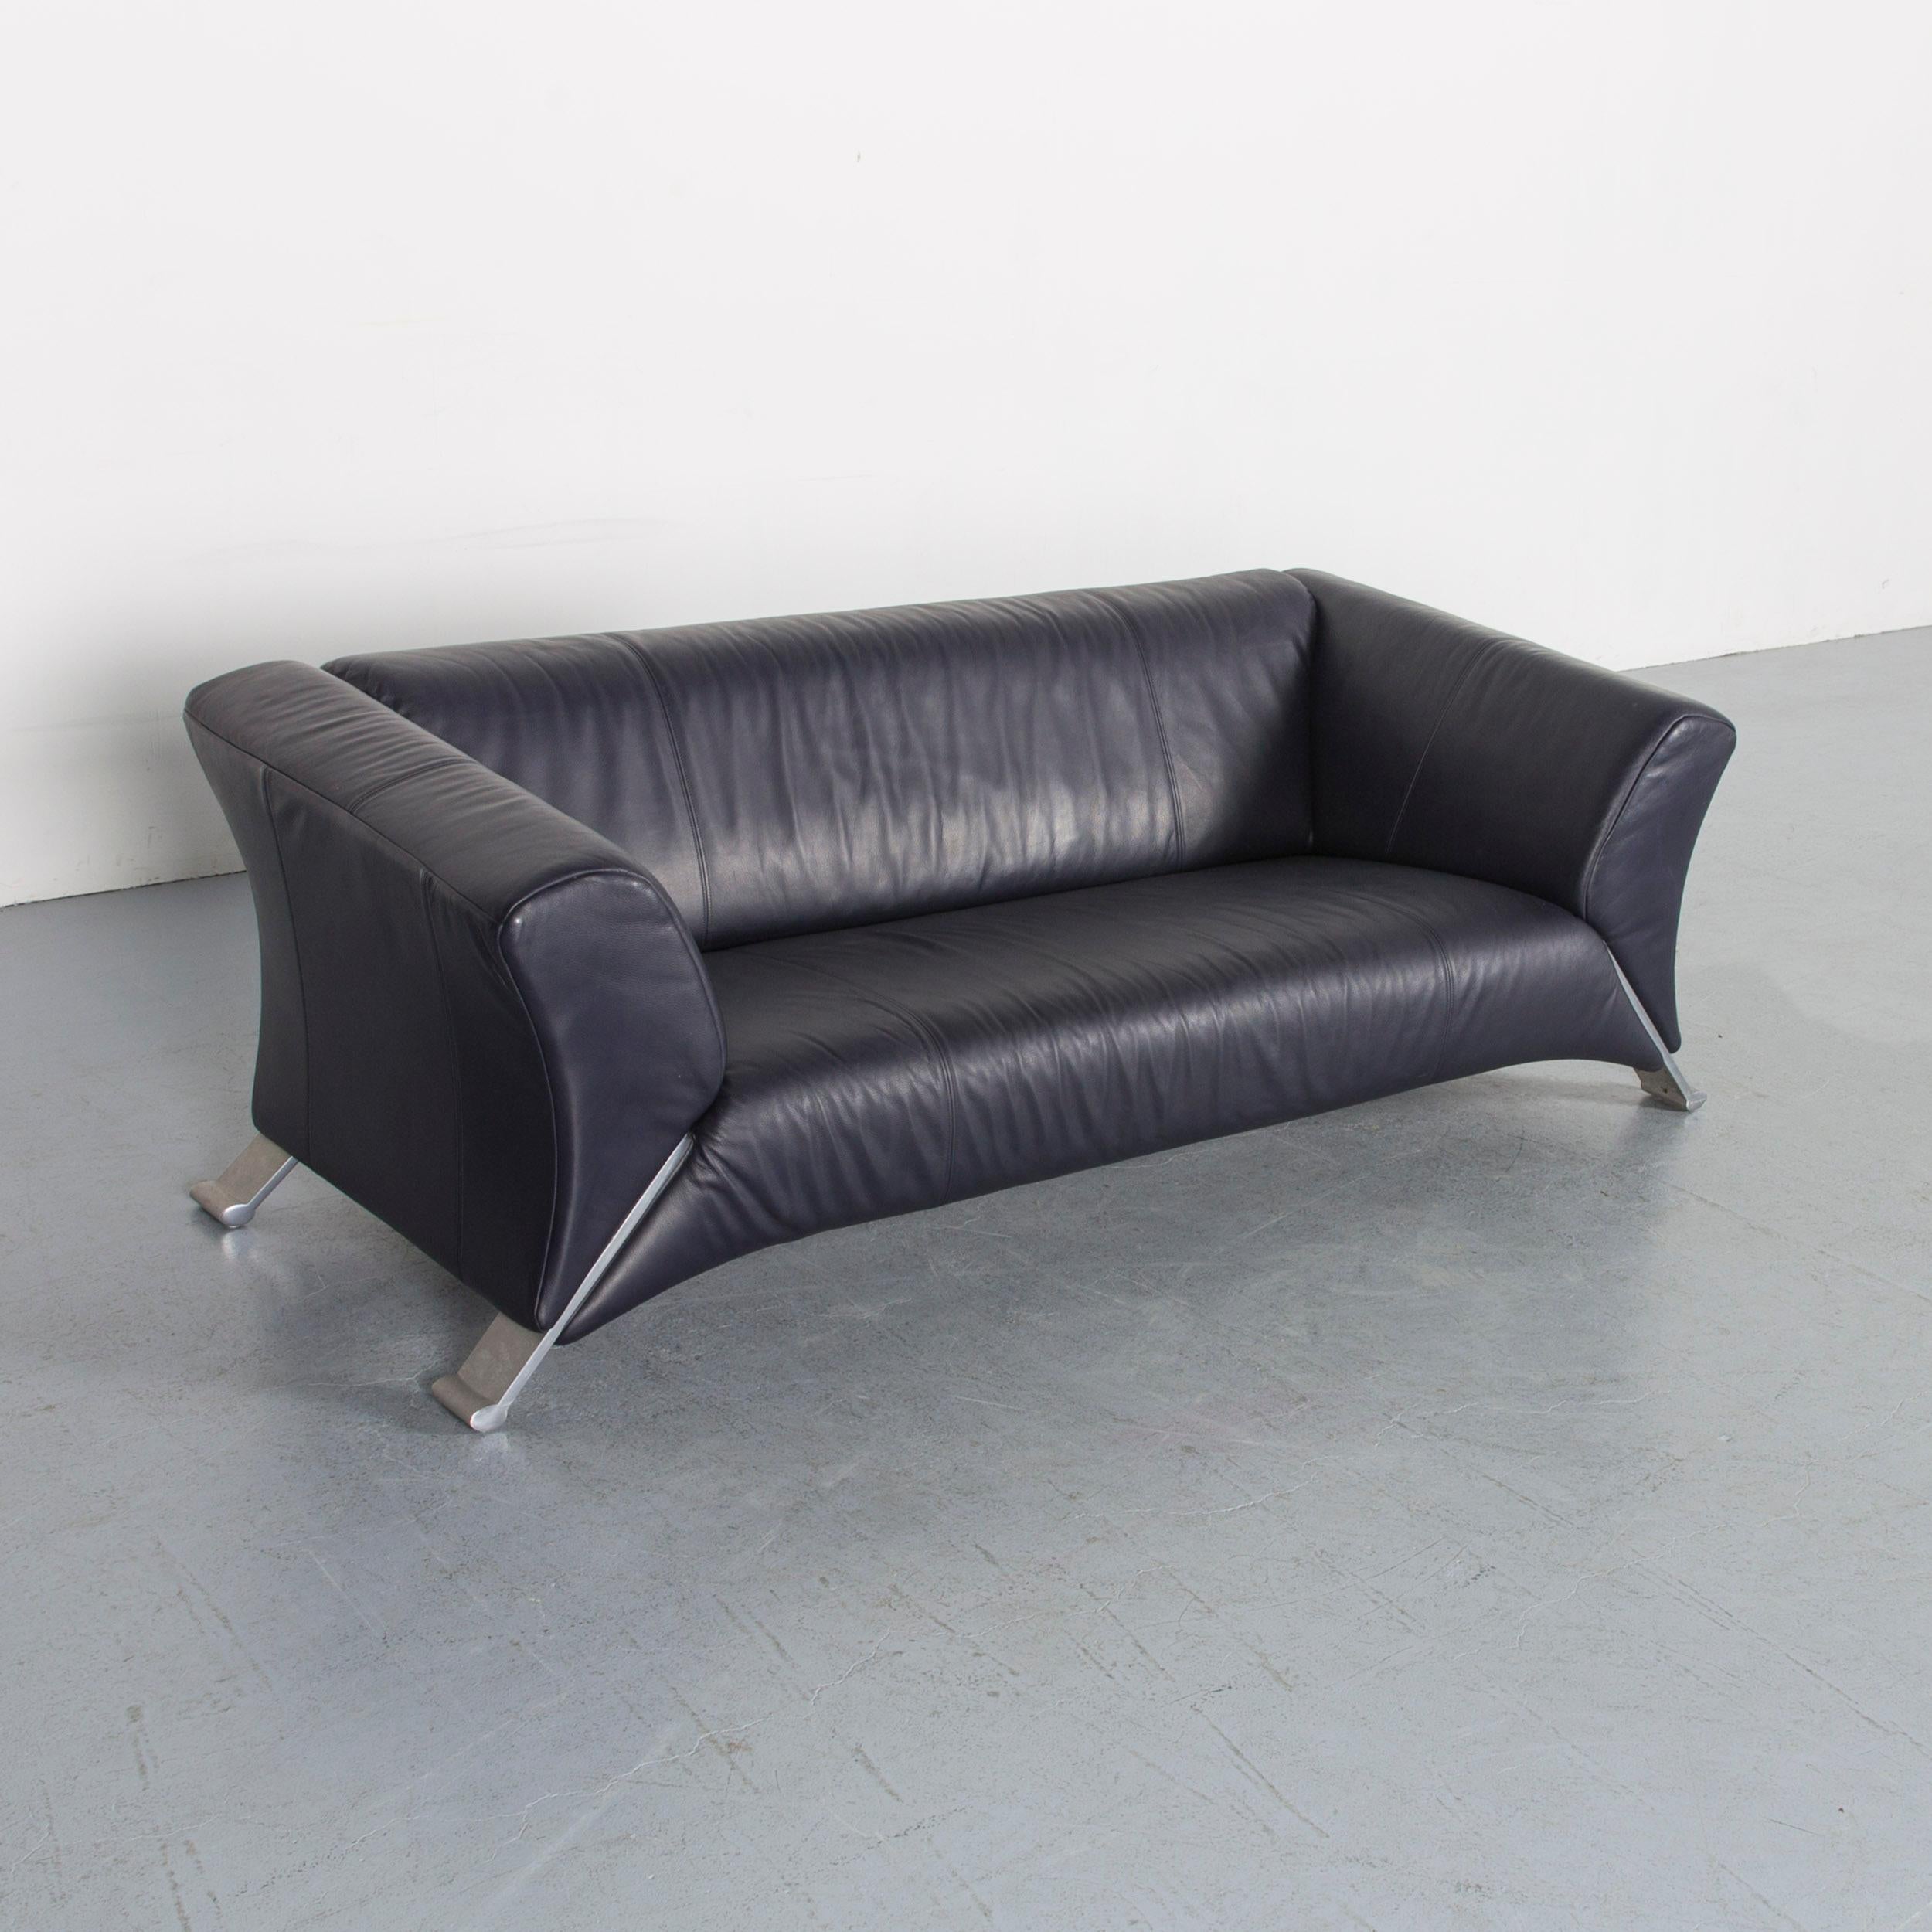 We bring to you an Rolf Benz 322 designer sofa dark blue three-seat leather modern couch.